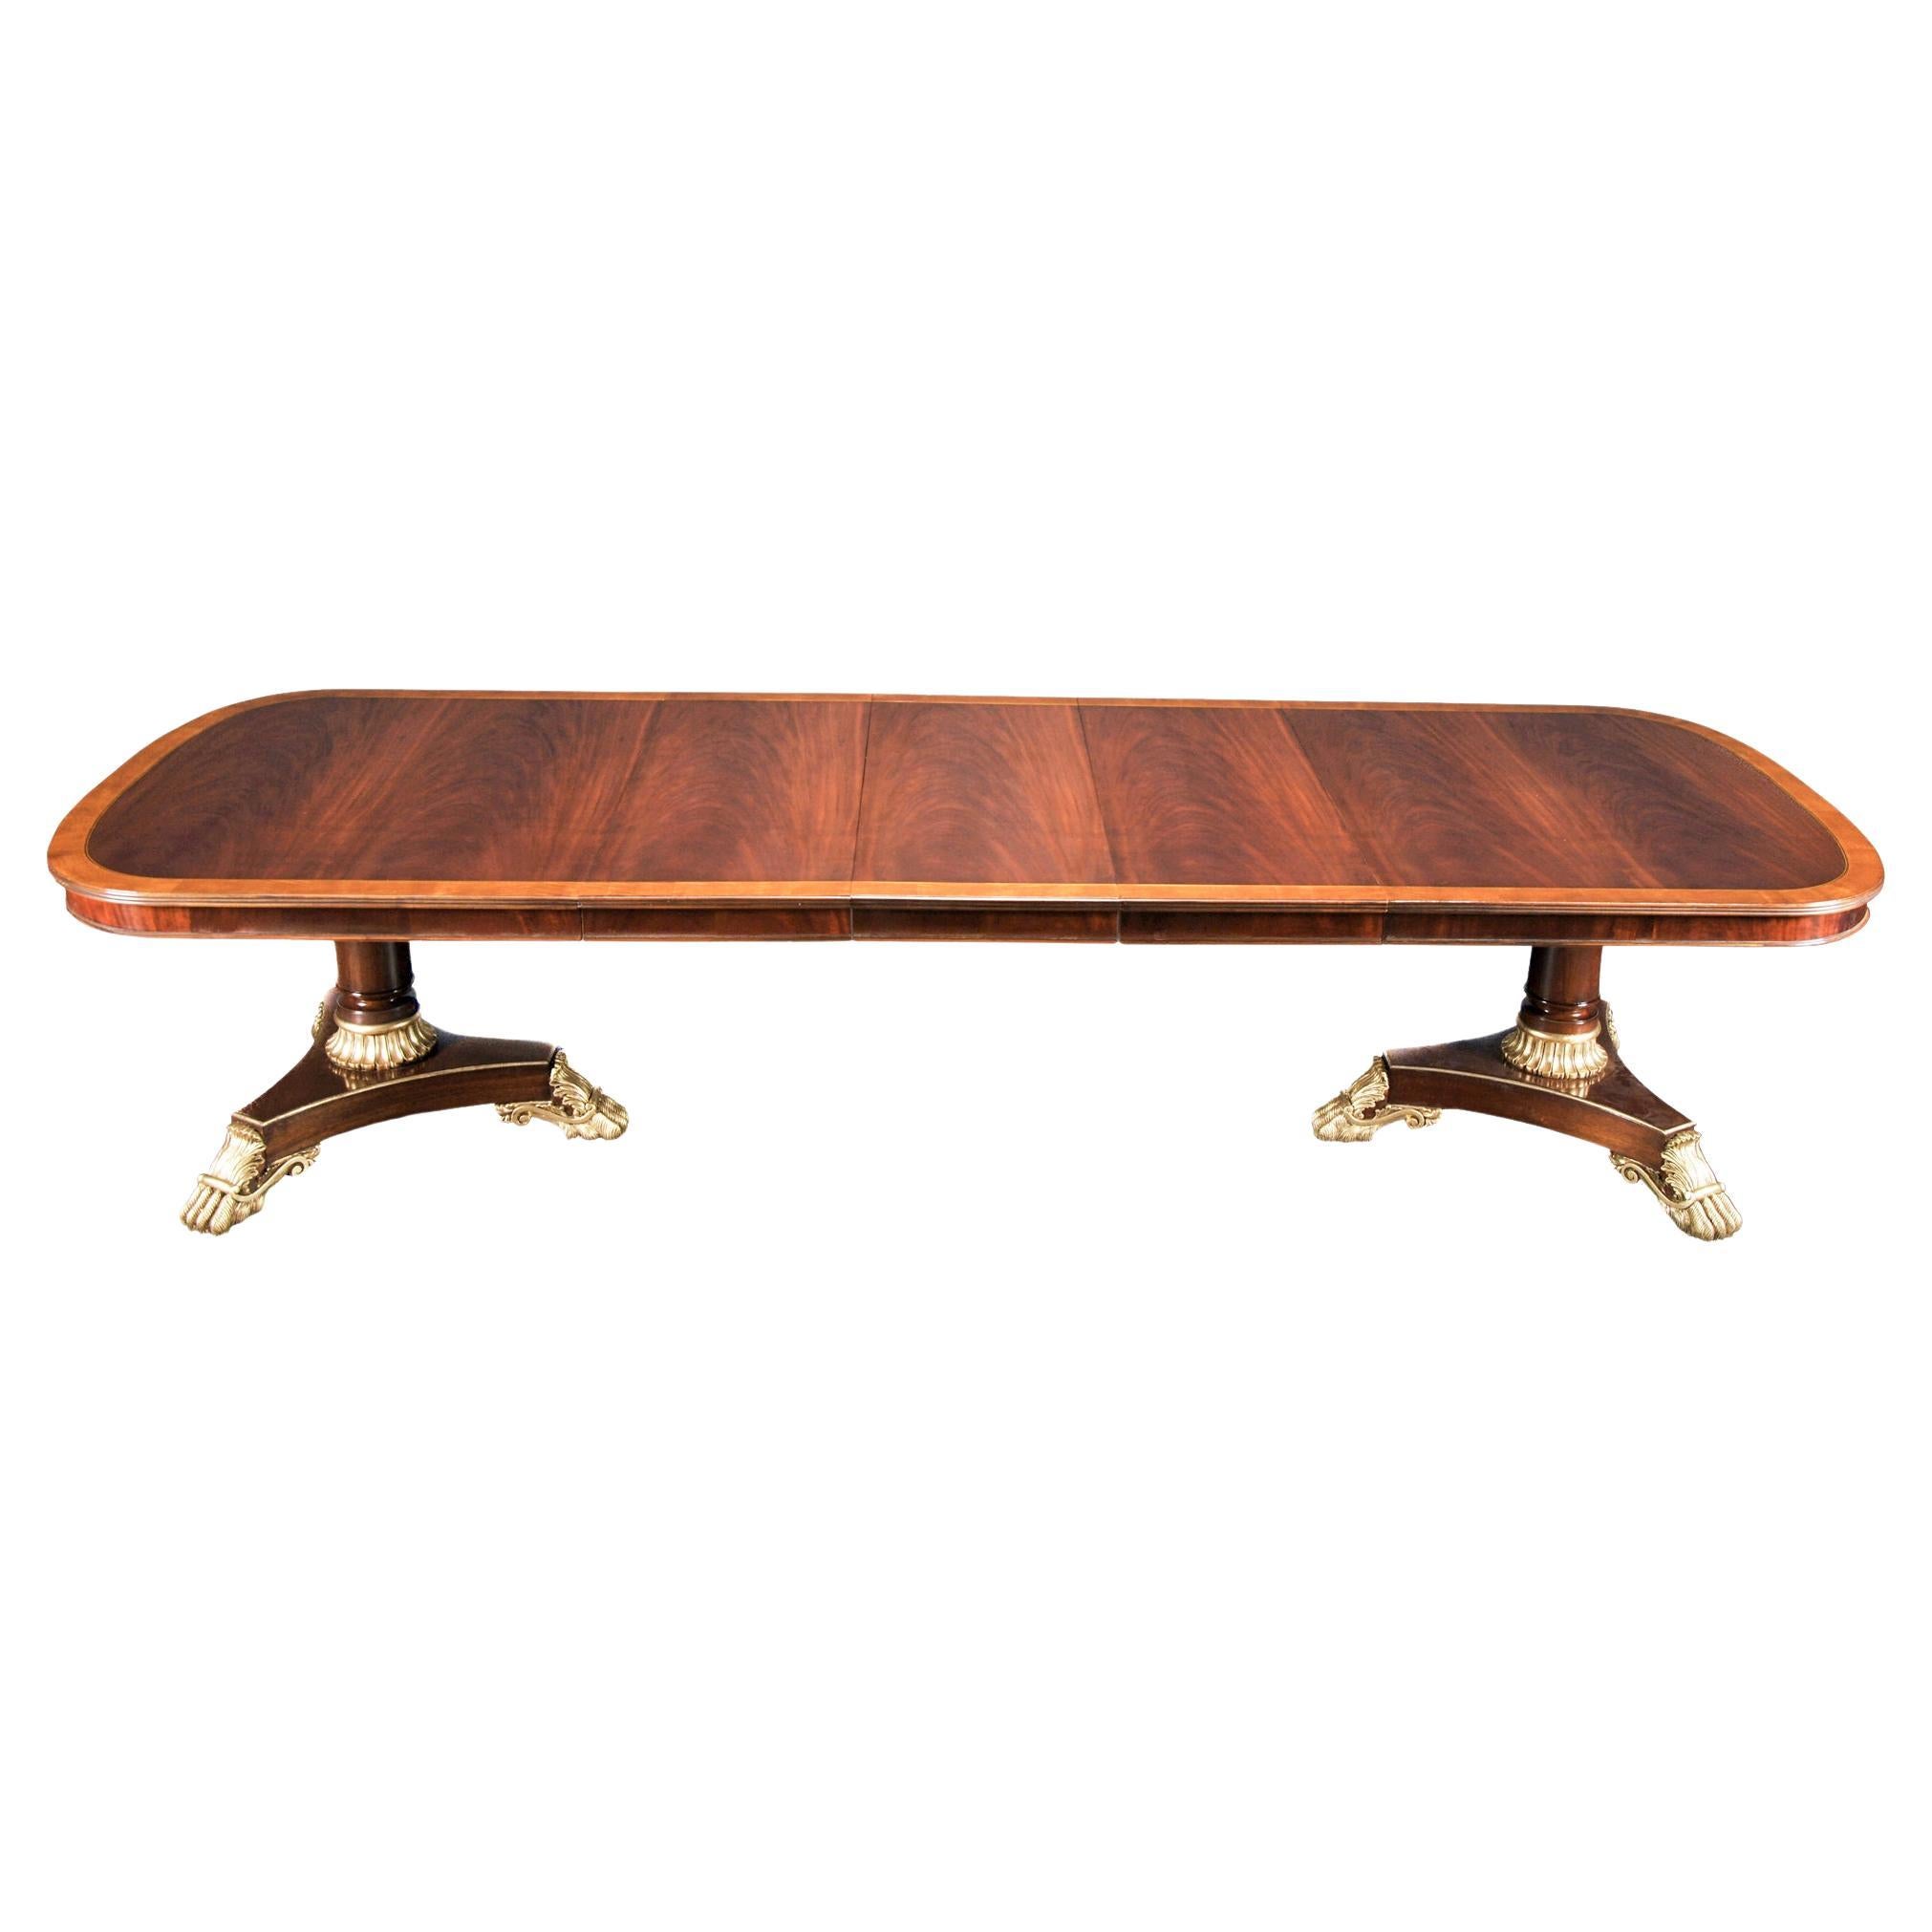 How much is a Duncan Phyfe dining table worth?